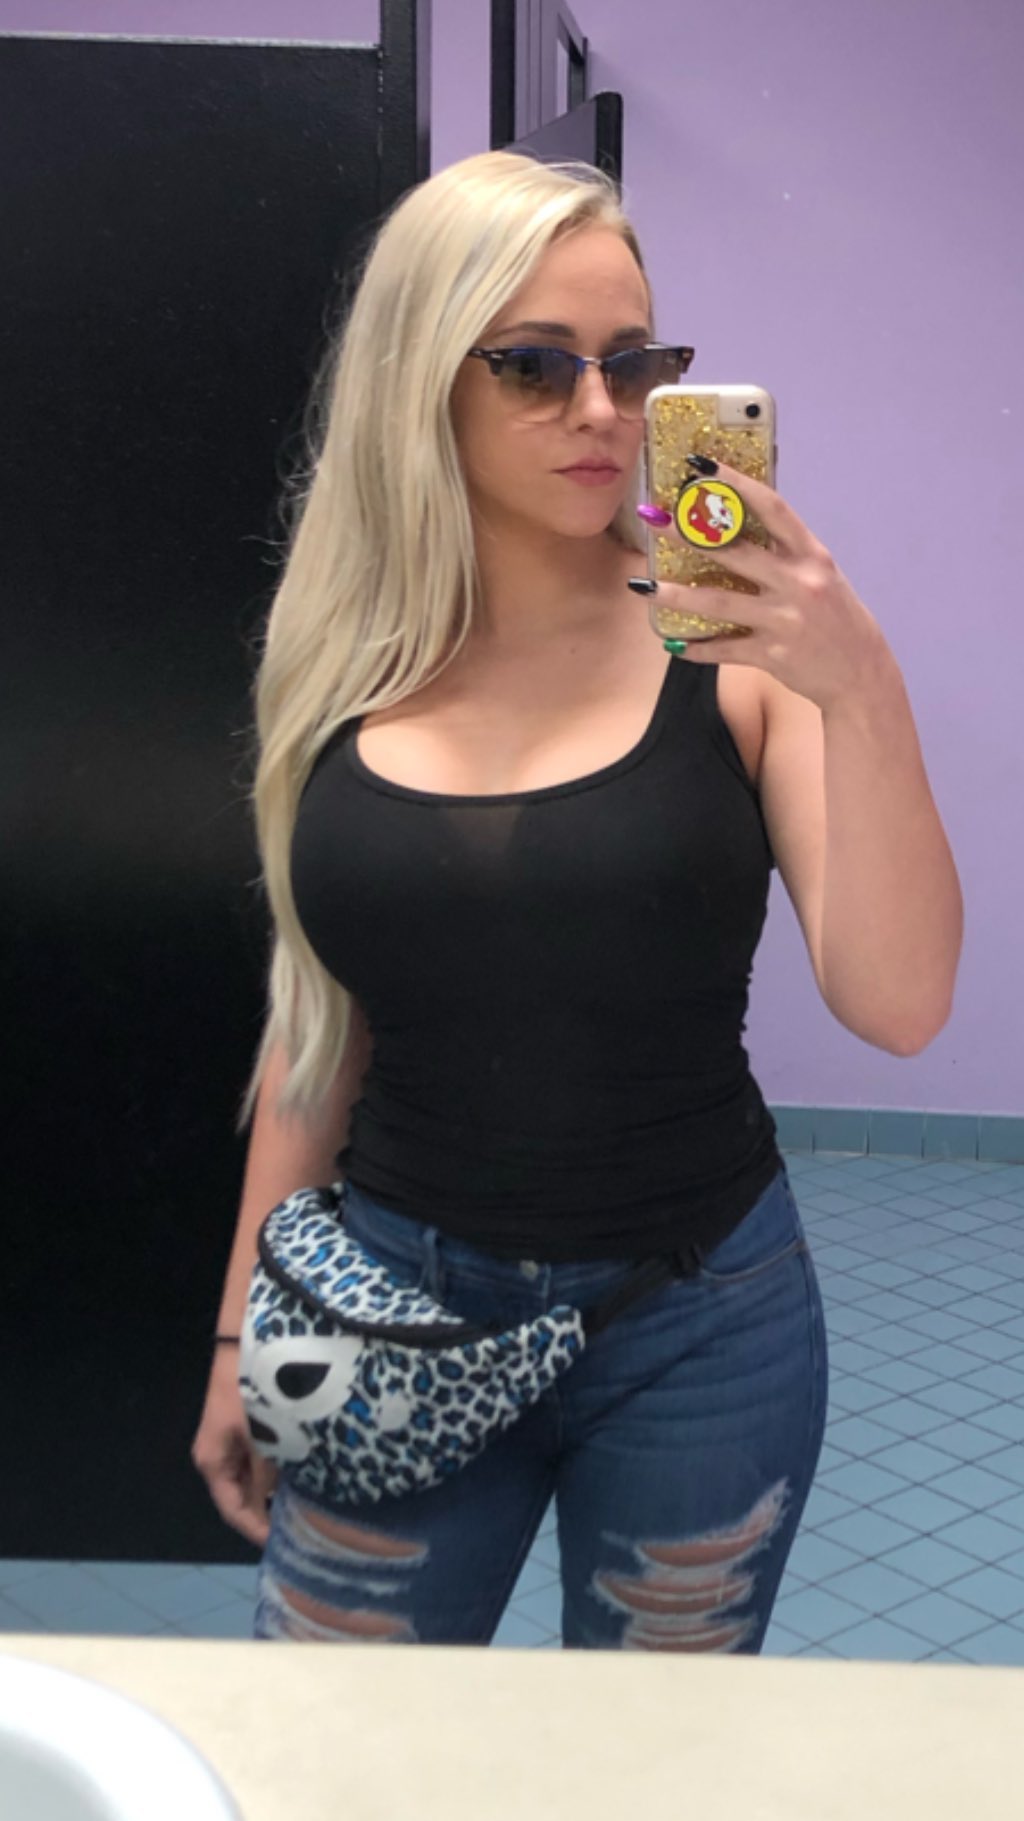 Penelope Ford